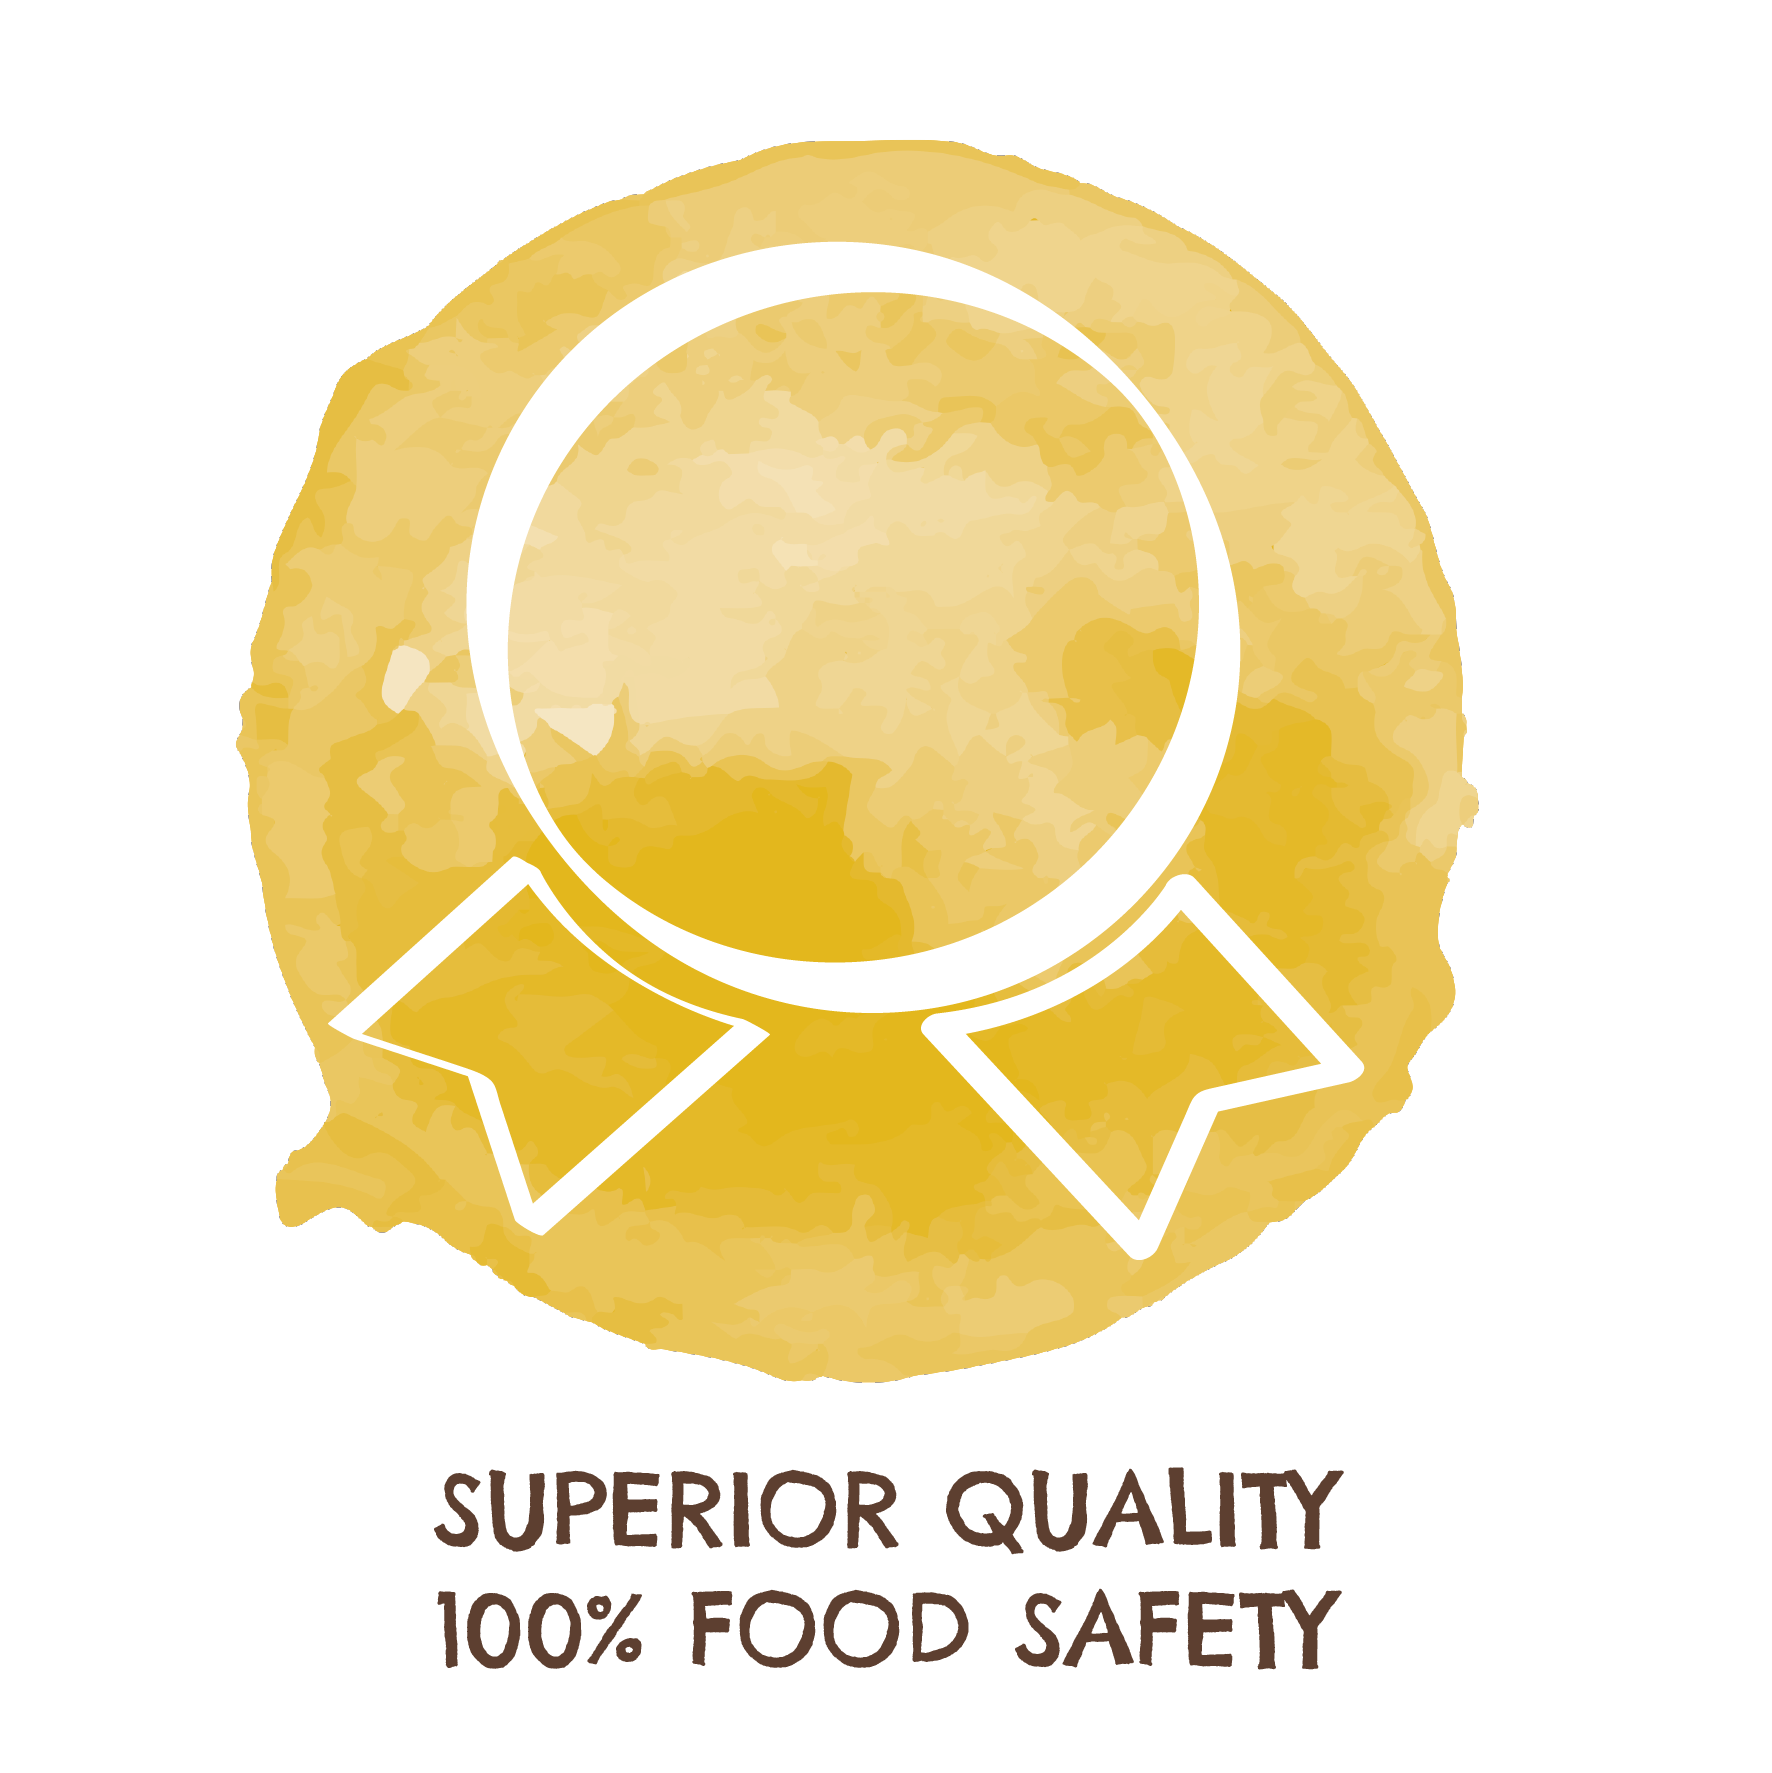 Superior-quality-and-food-safety